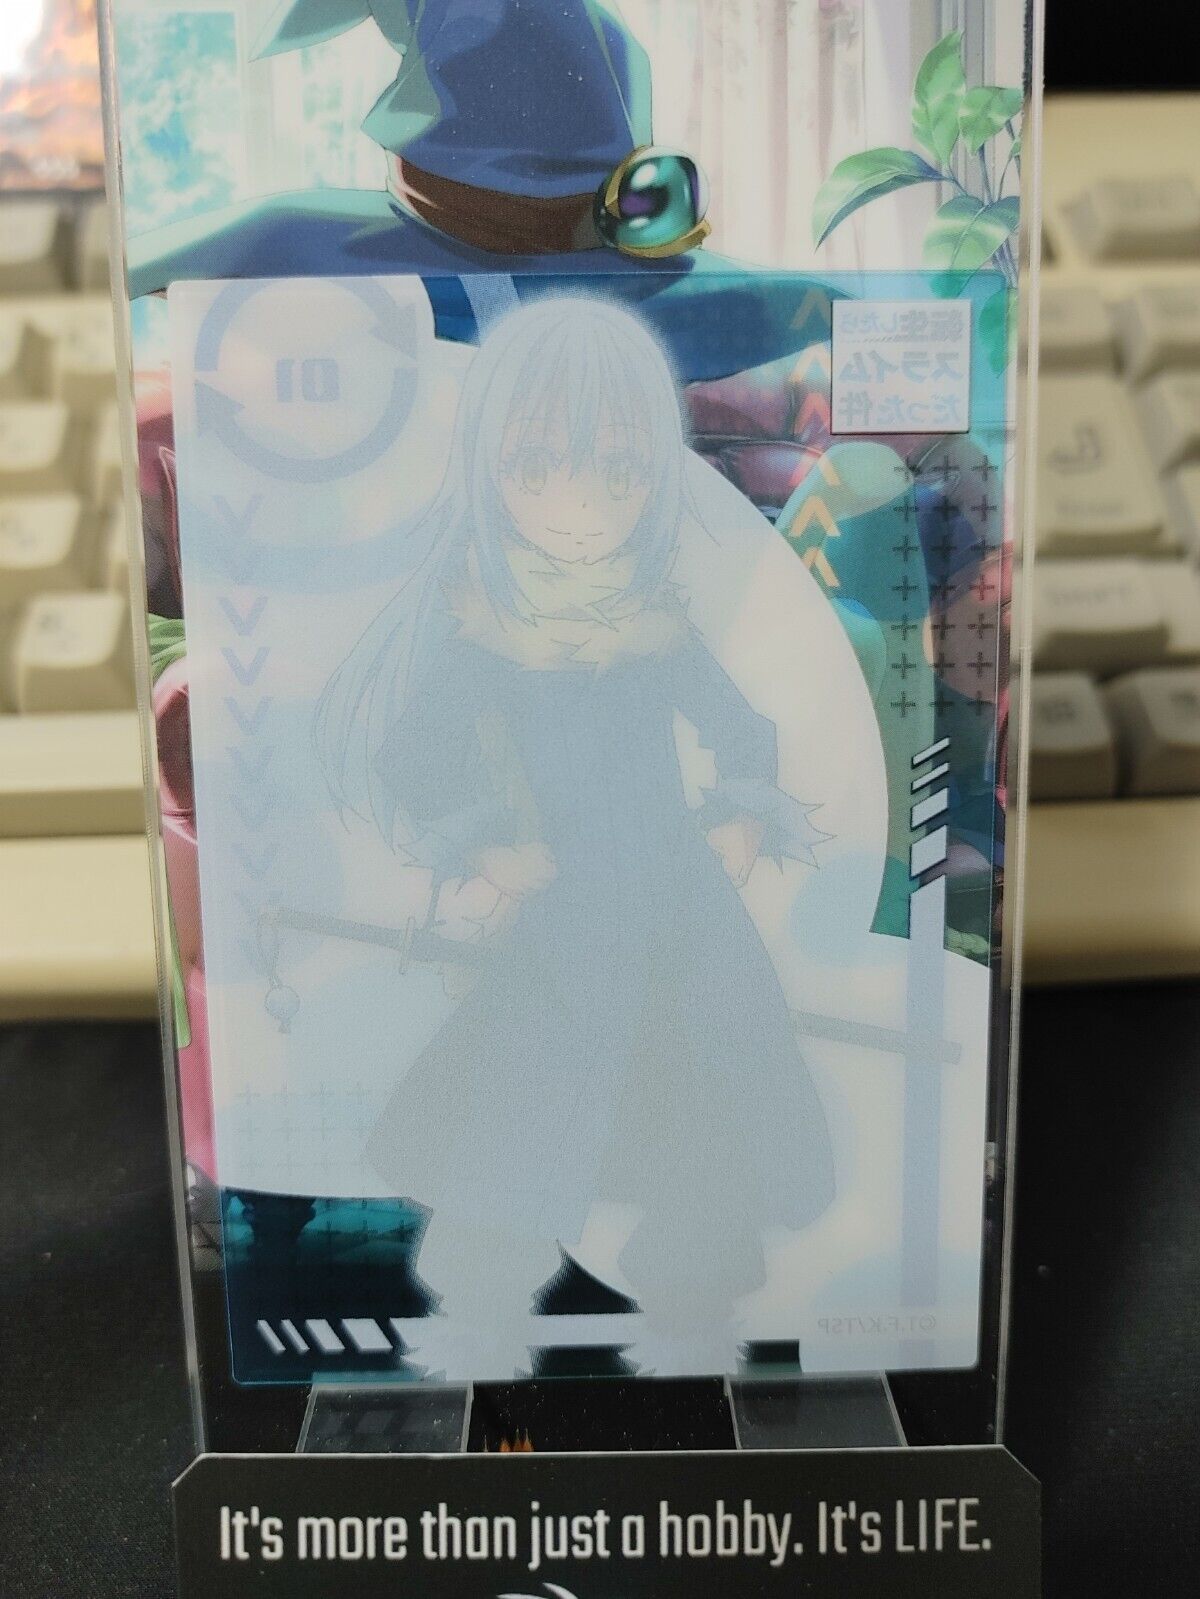 That Time I Got Reincarnated As A Slime Clear Card Collection Rimuru No. 01 JP